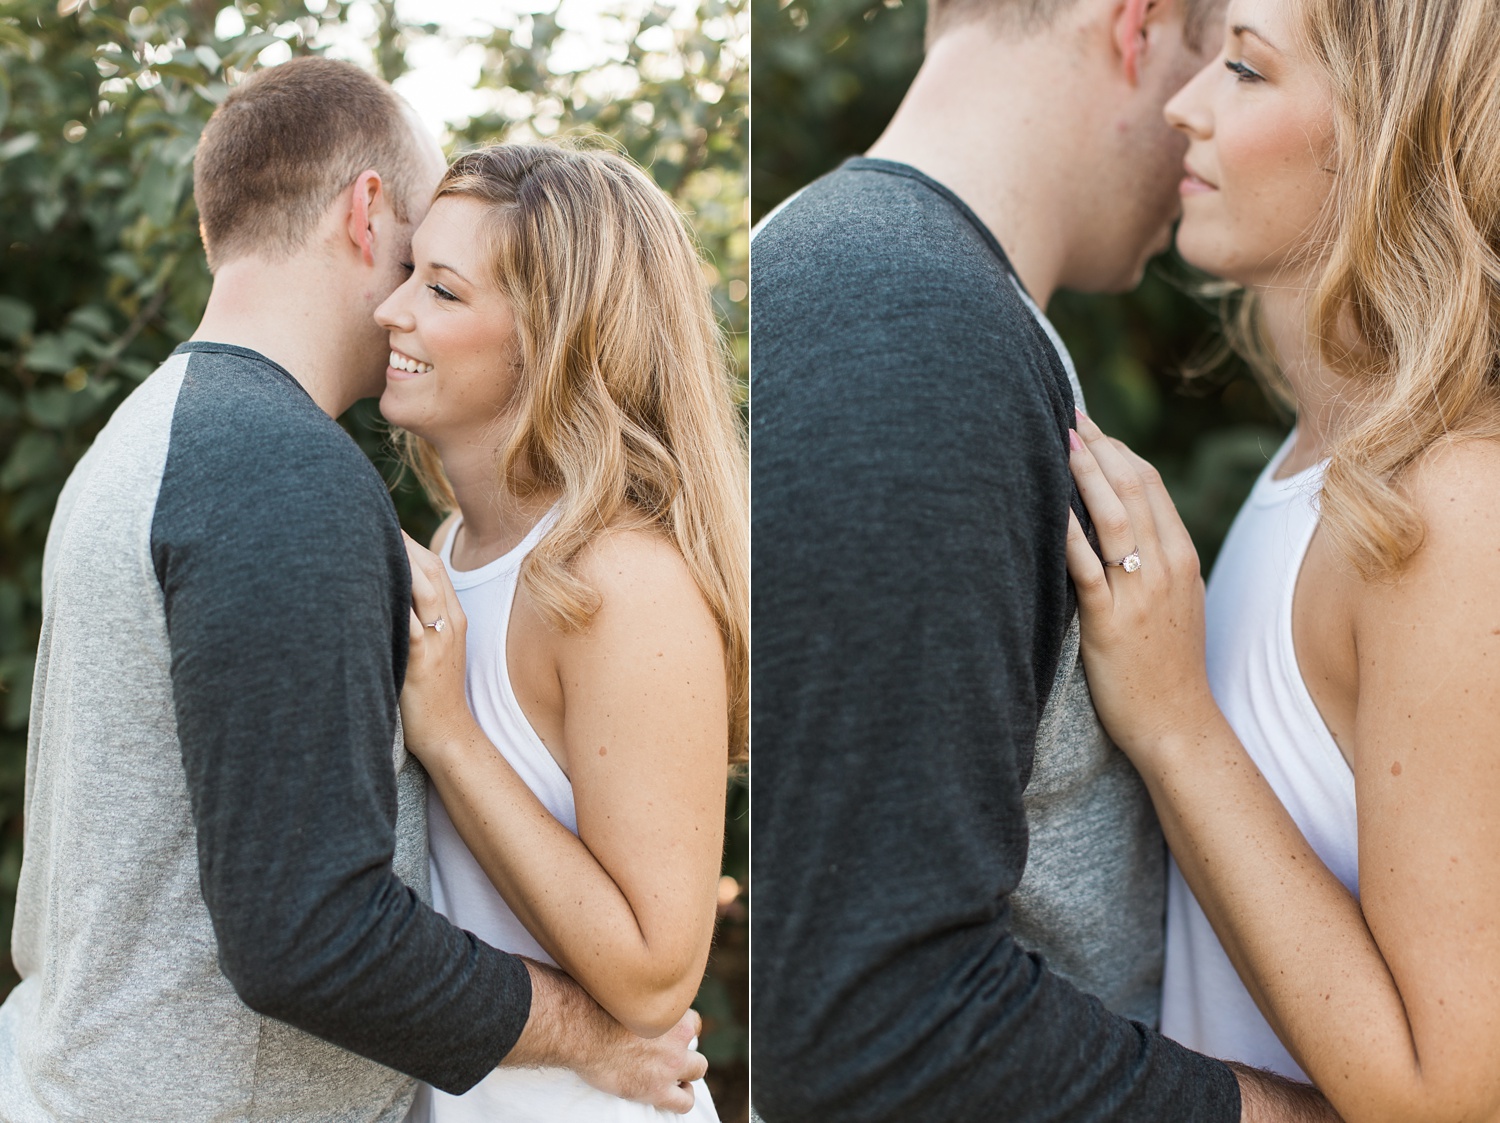 Apple Orchard Fall Engagement Session | Media PA Engagement Photographer | Kirsten and Kevin